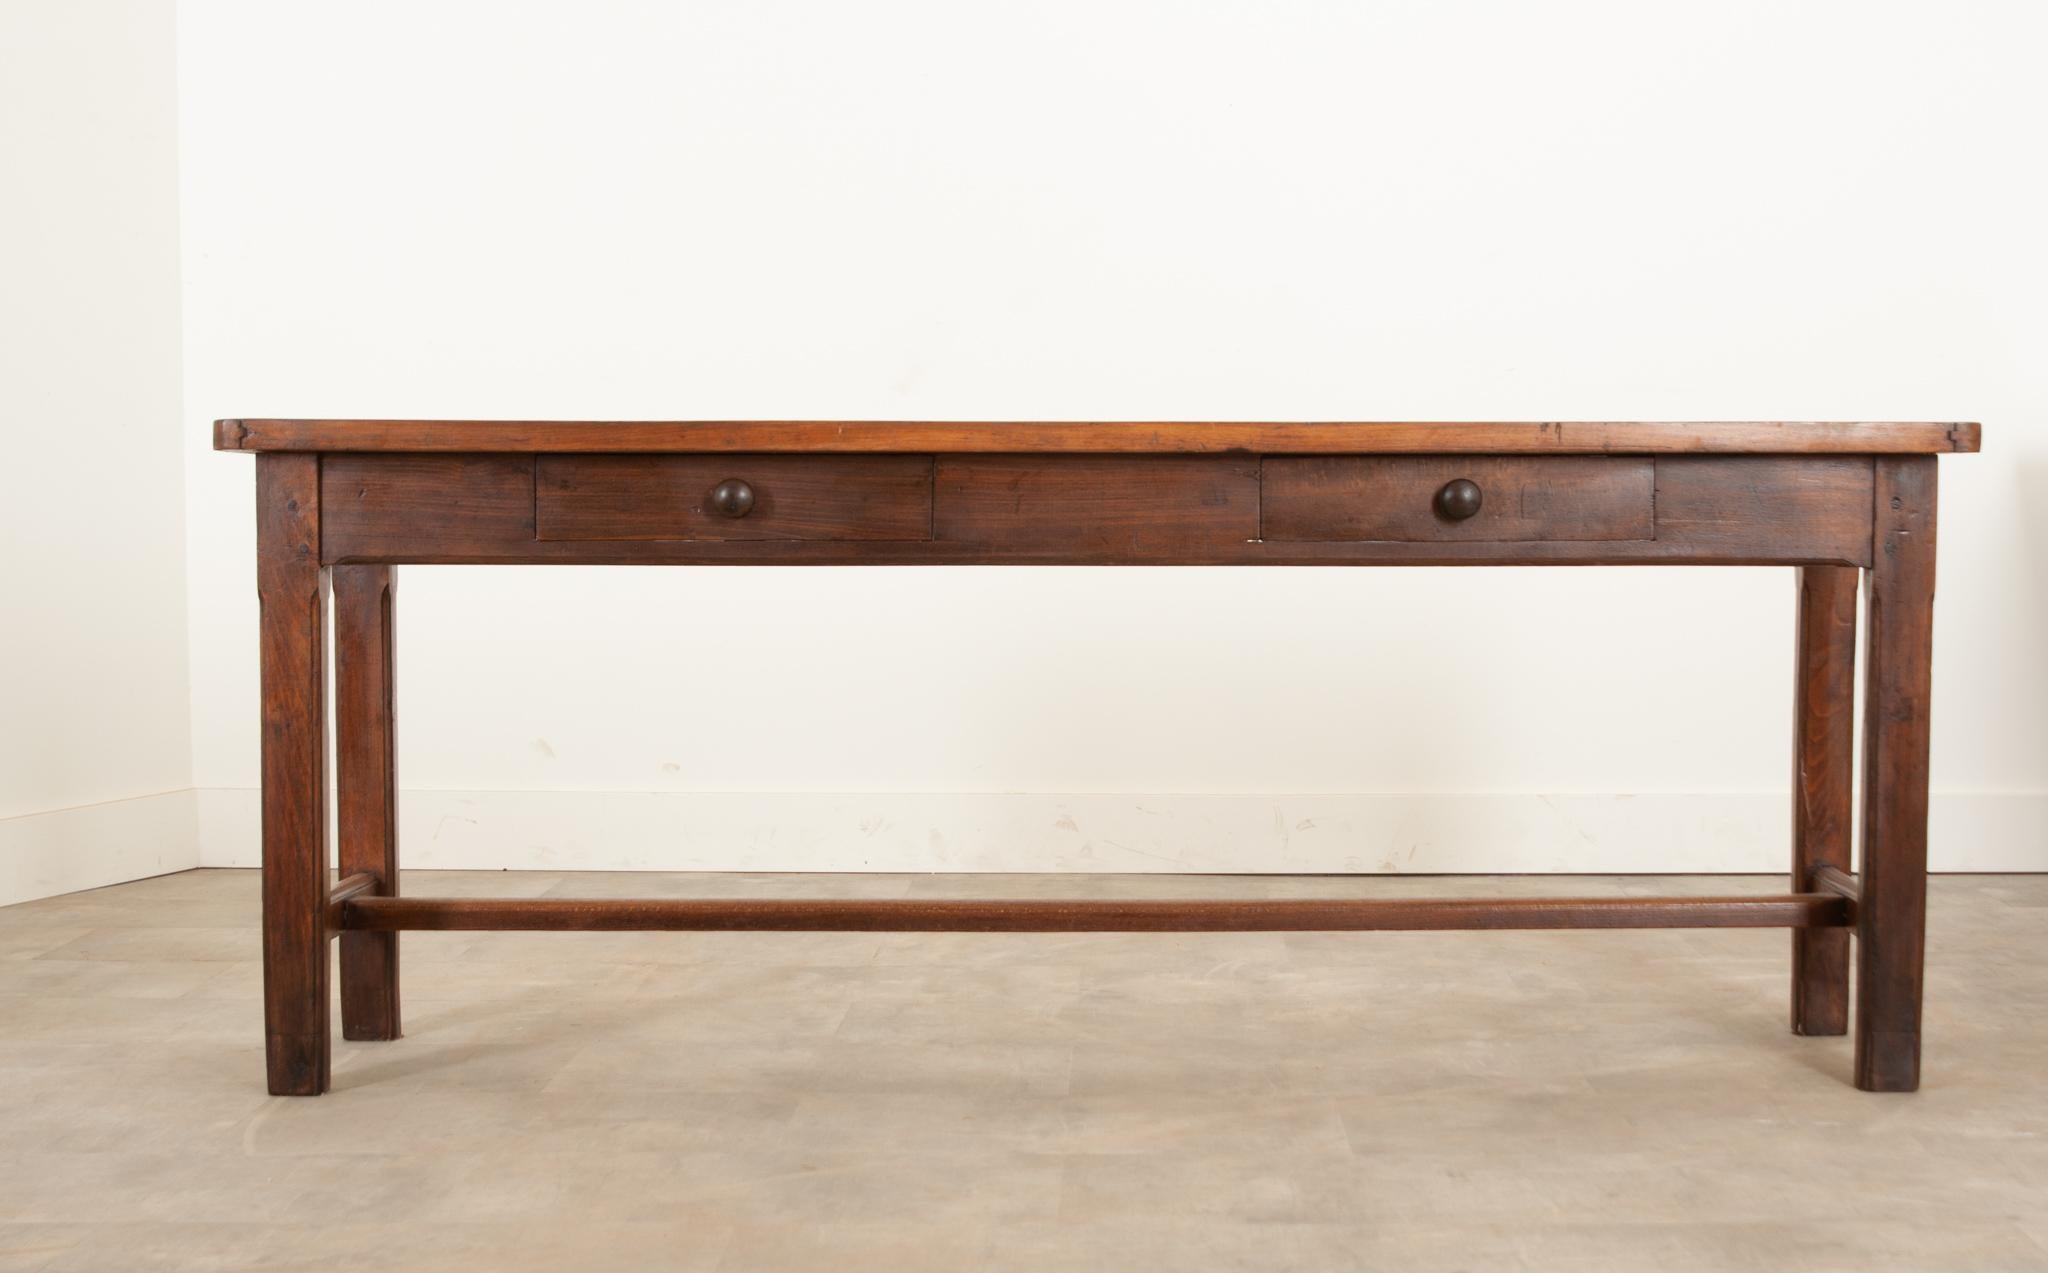 English thick walnut top server with fruitwood base. The apron houses two drawers, each fixed with a simple metal pull. Chamfered legs connect to an H shaped stretcher for continued support for everyday use. Make sure to view the detailed images to